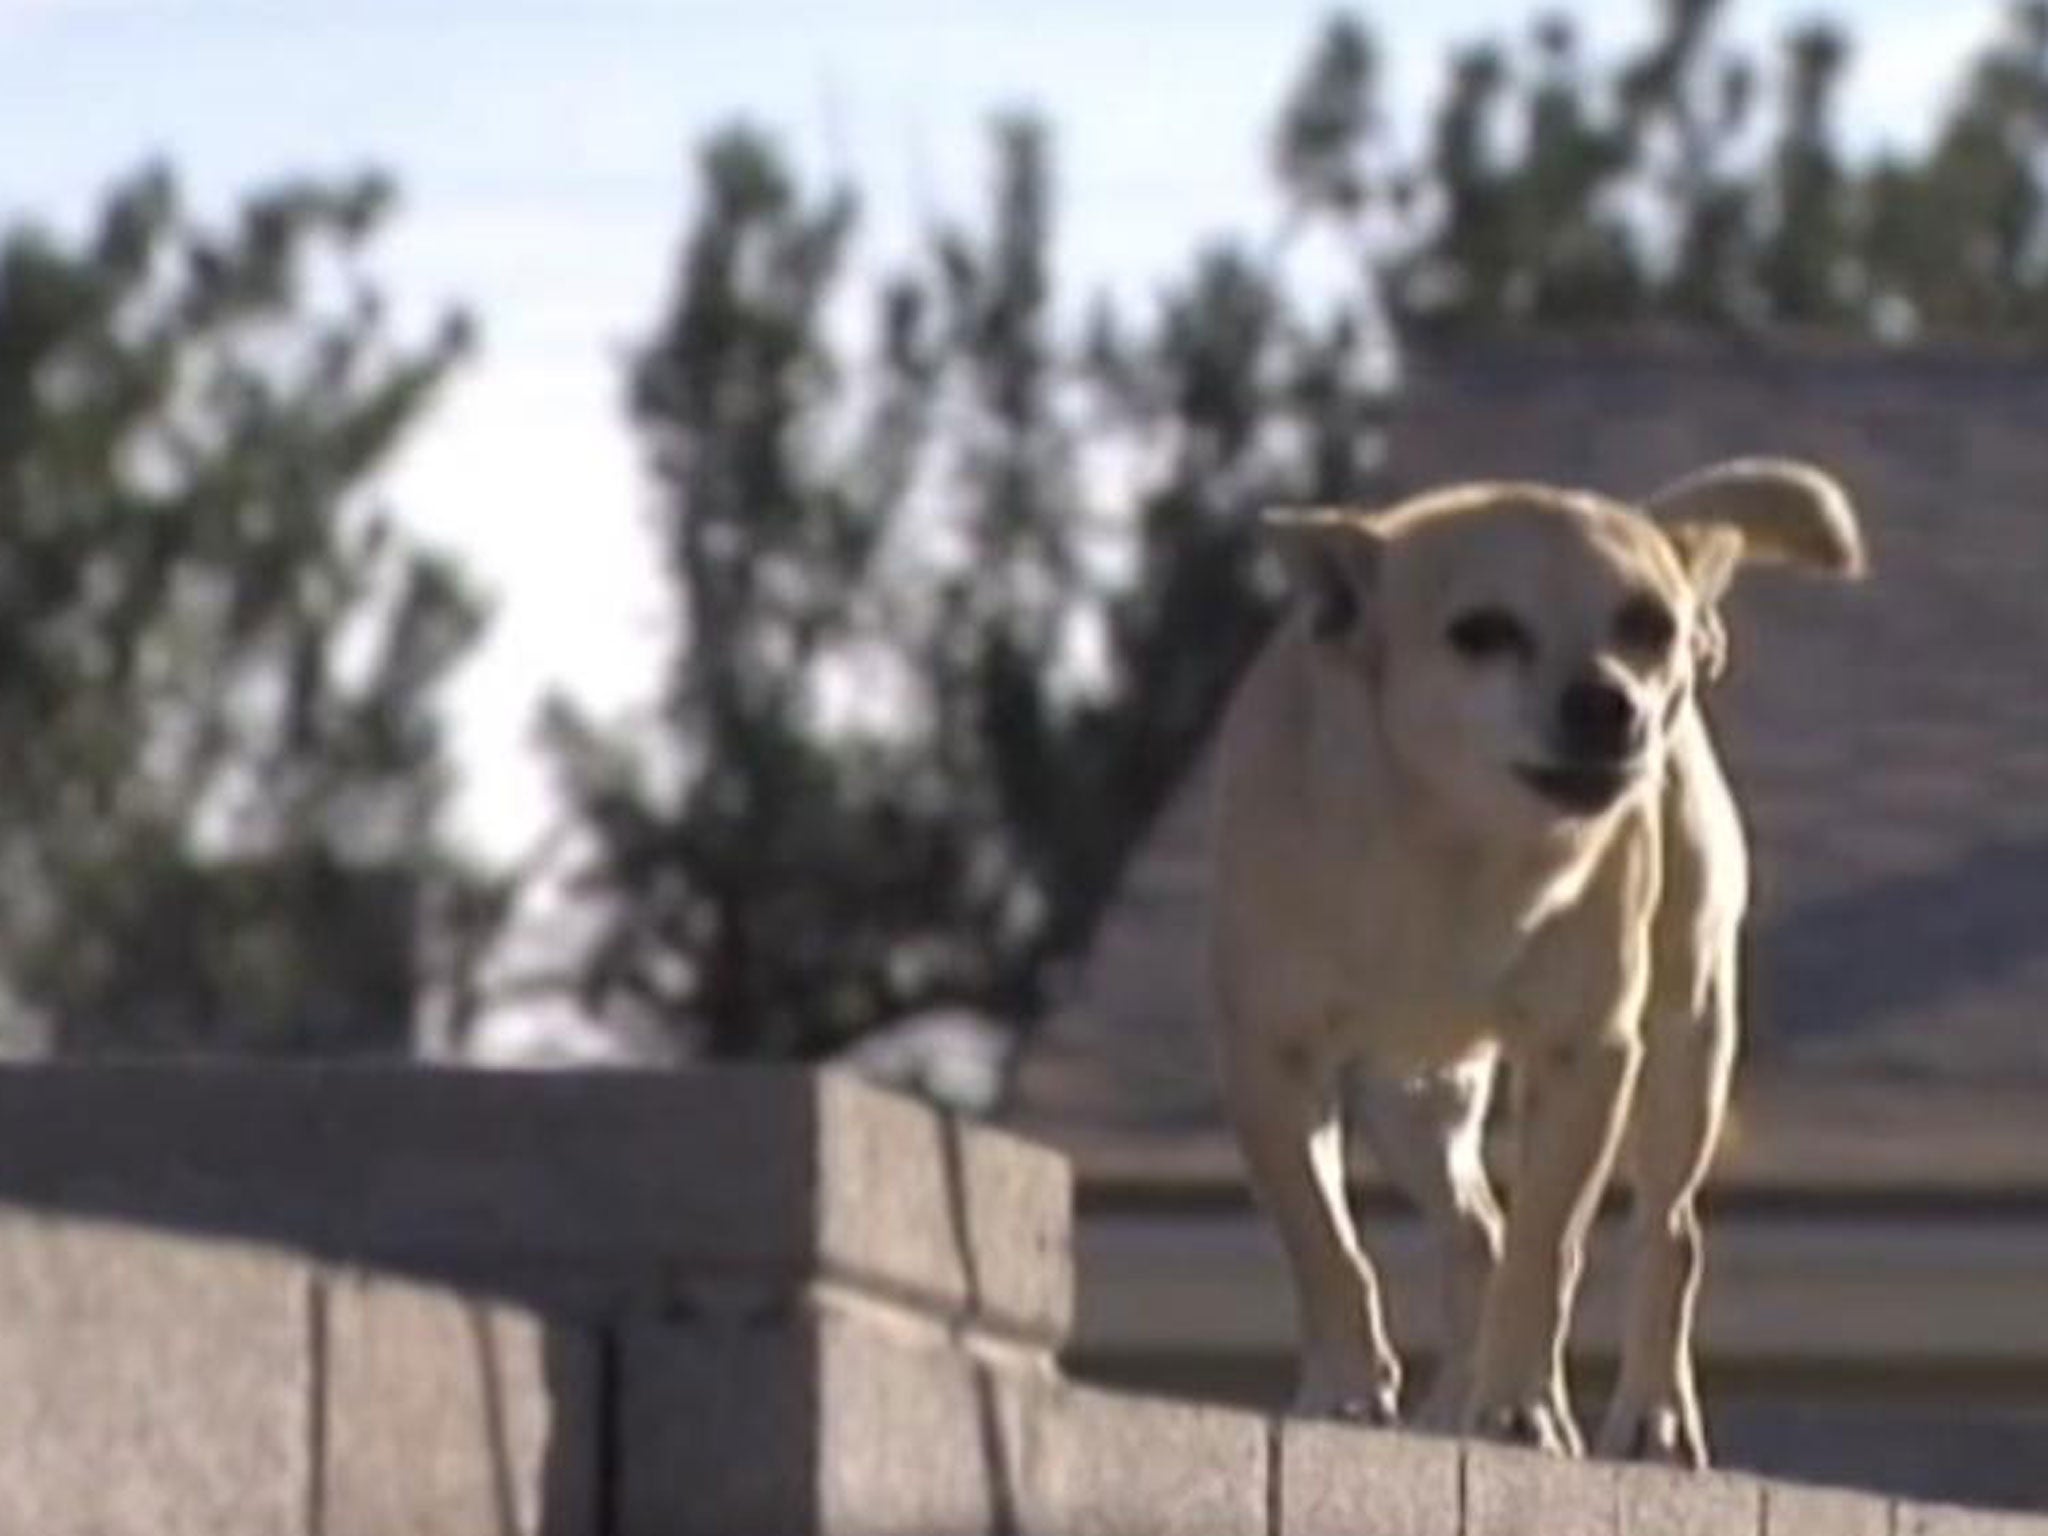 Residents of an Arizona neighbourhood say they are being terrorised by pack-forming stray Chihuahuas, who are running rampage in the suburb of Maryvale.